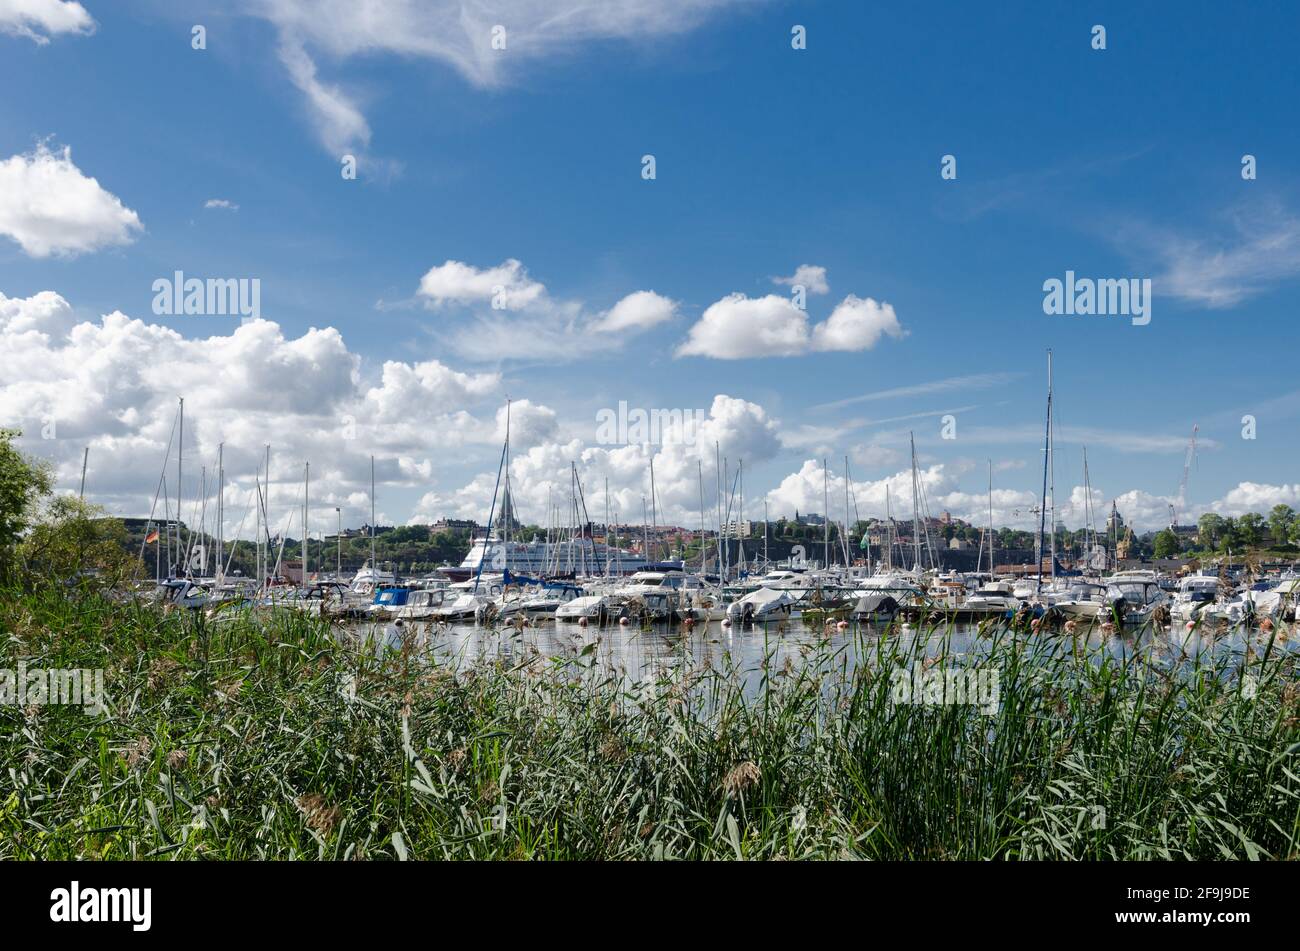 Green grass and yachts in harbor Djurgarden, Stockholm, Sweden Stock Photo